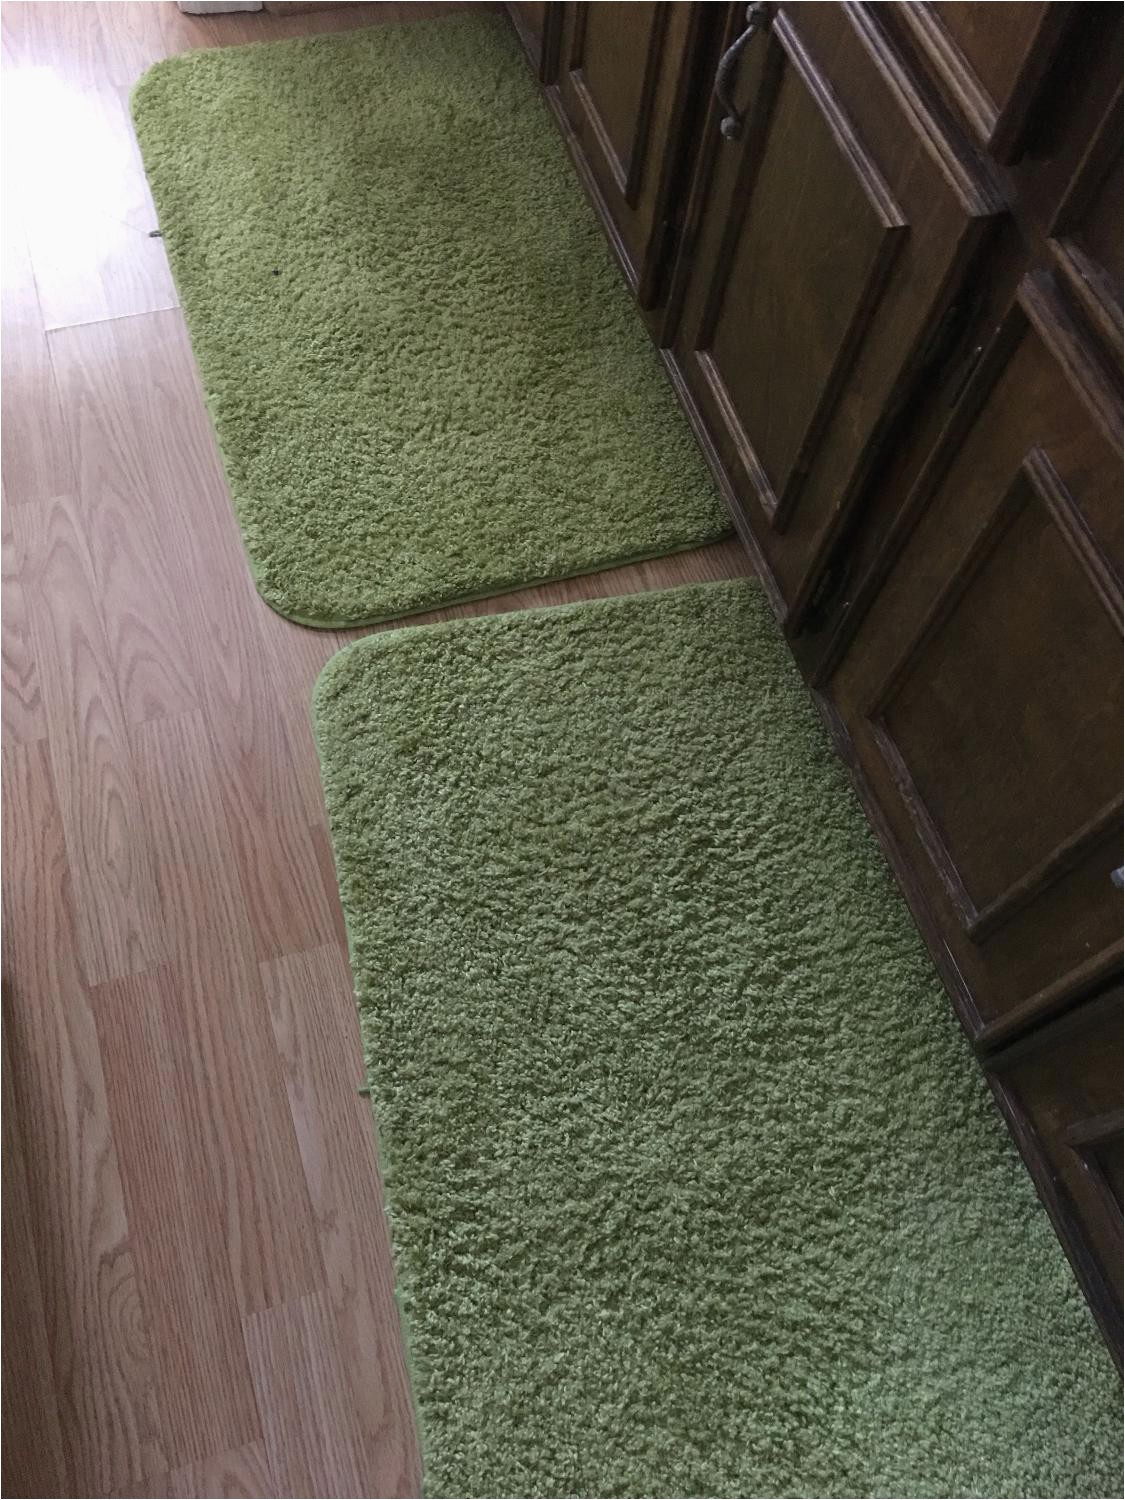 Bathroom Rugs Lime Green Lime Green Bathroom Rugs and Lime Green Valance